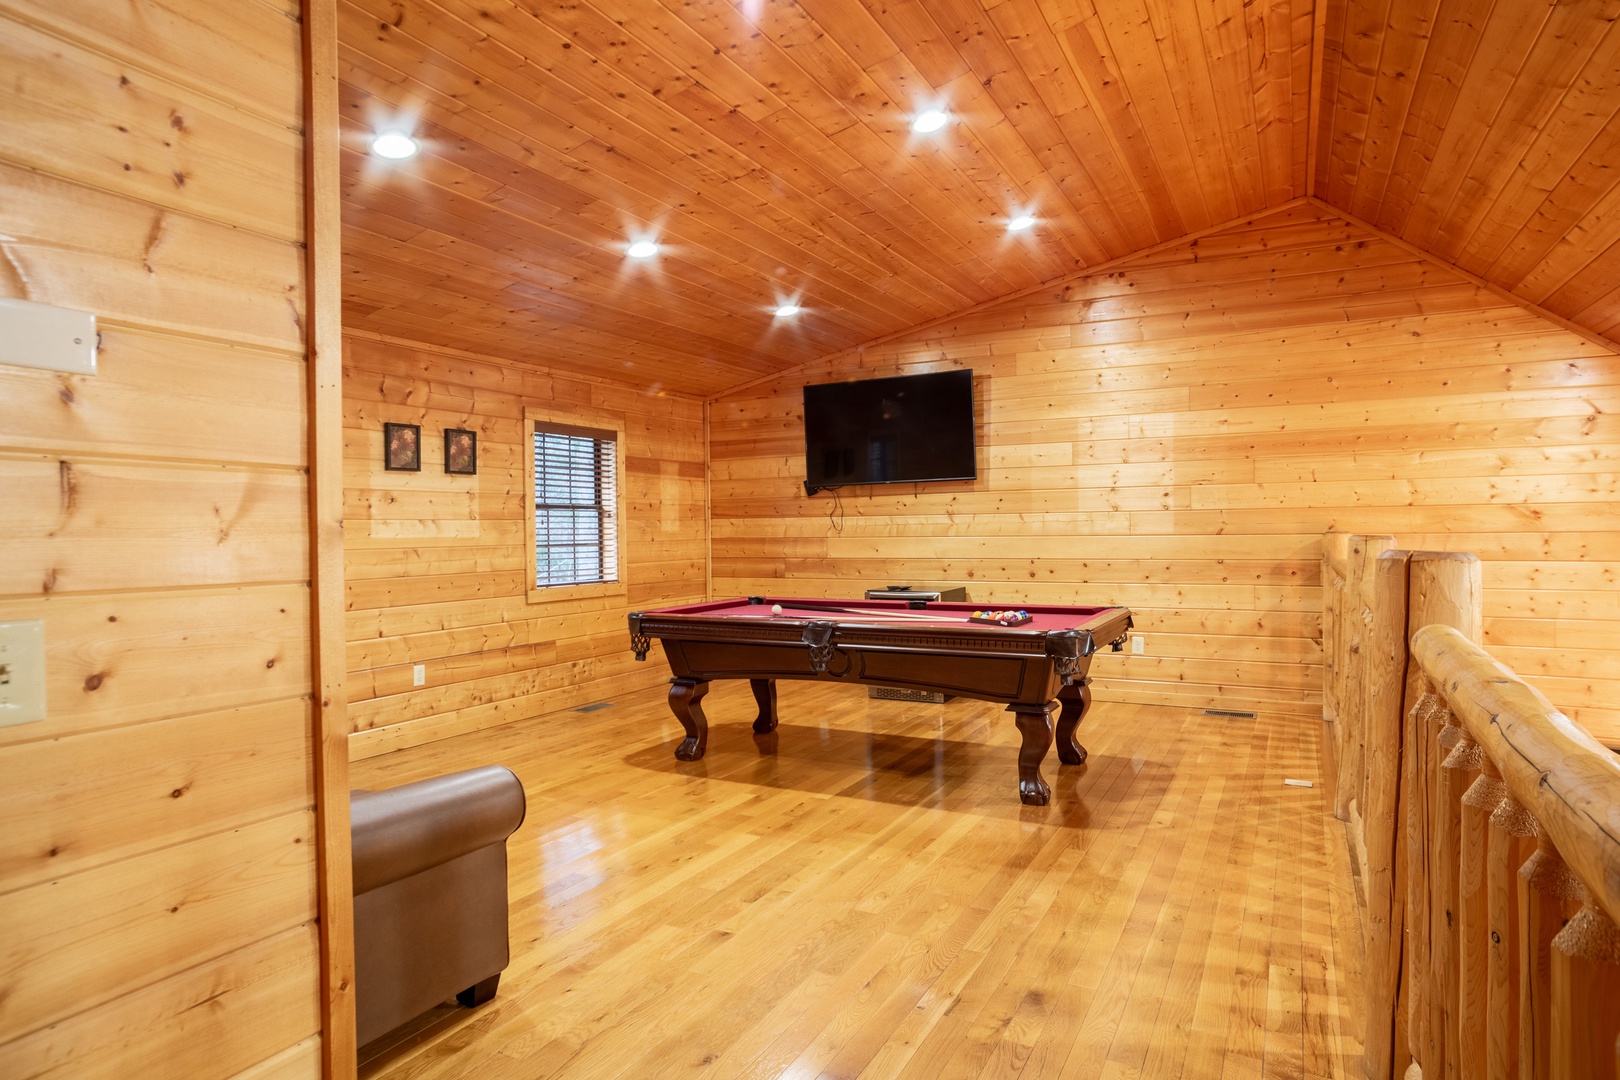 Pool Table and Flat Screen in the Loft at 3 Crazy Cubs, a 5 bedroom cabin rental located in pigeon forge